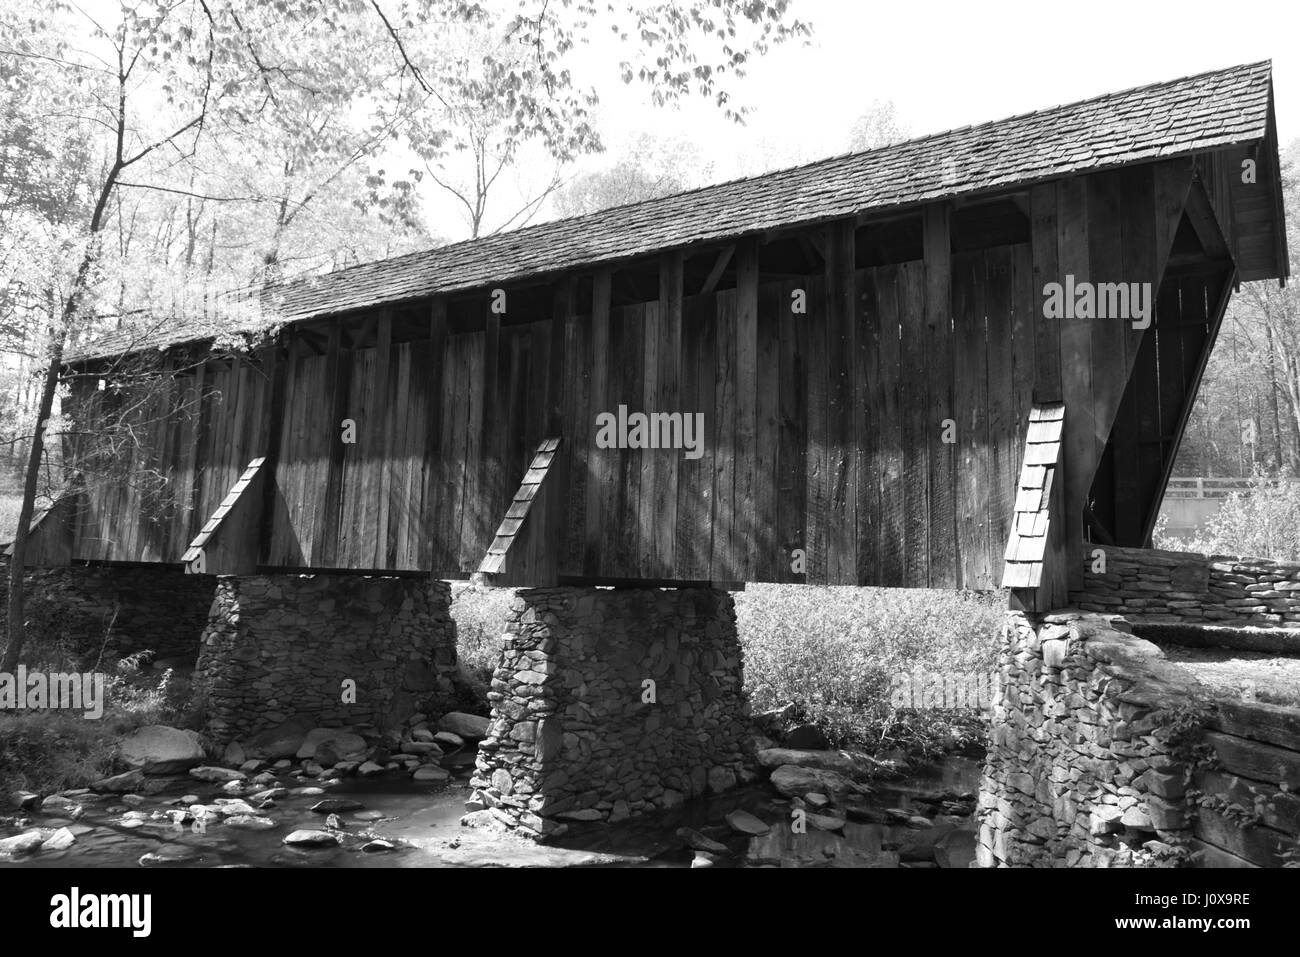 Restored Covered Bridge - these use to be found all over the United States. Stock Photo